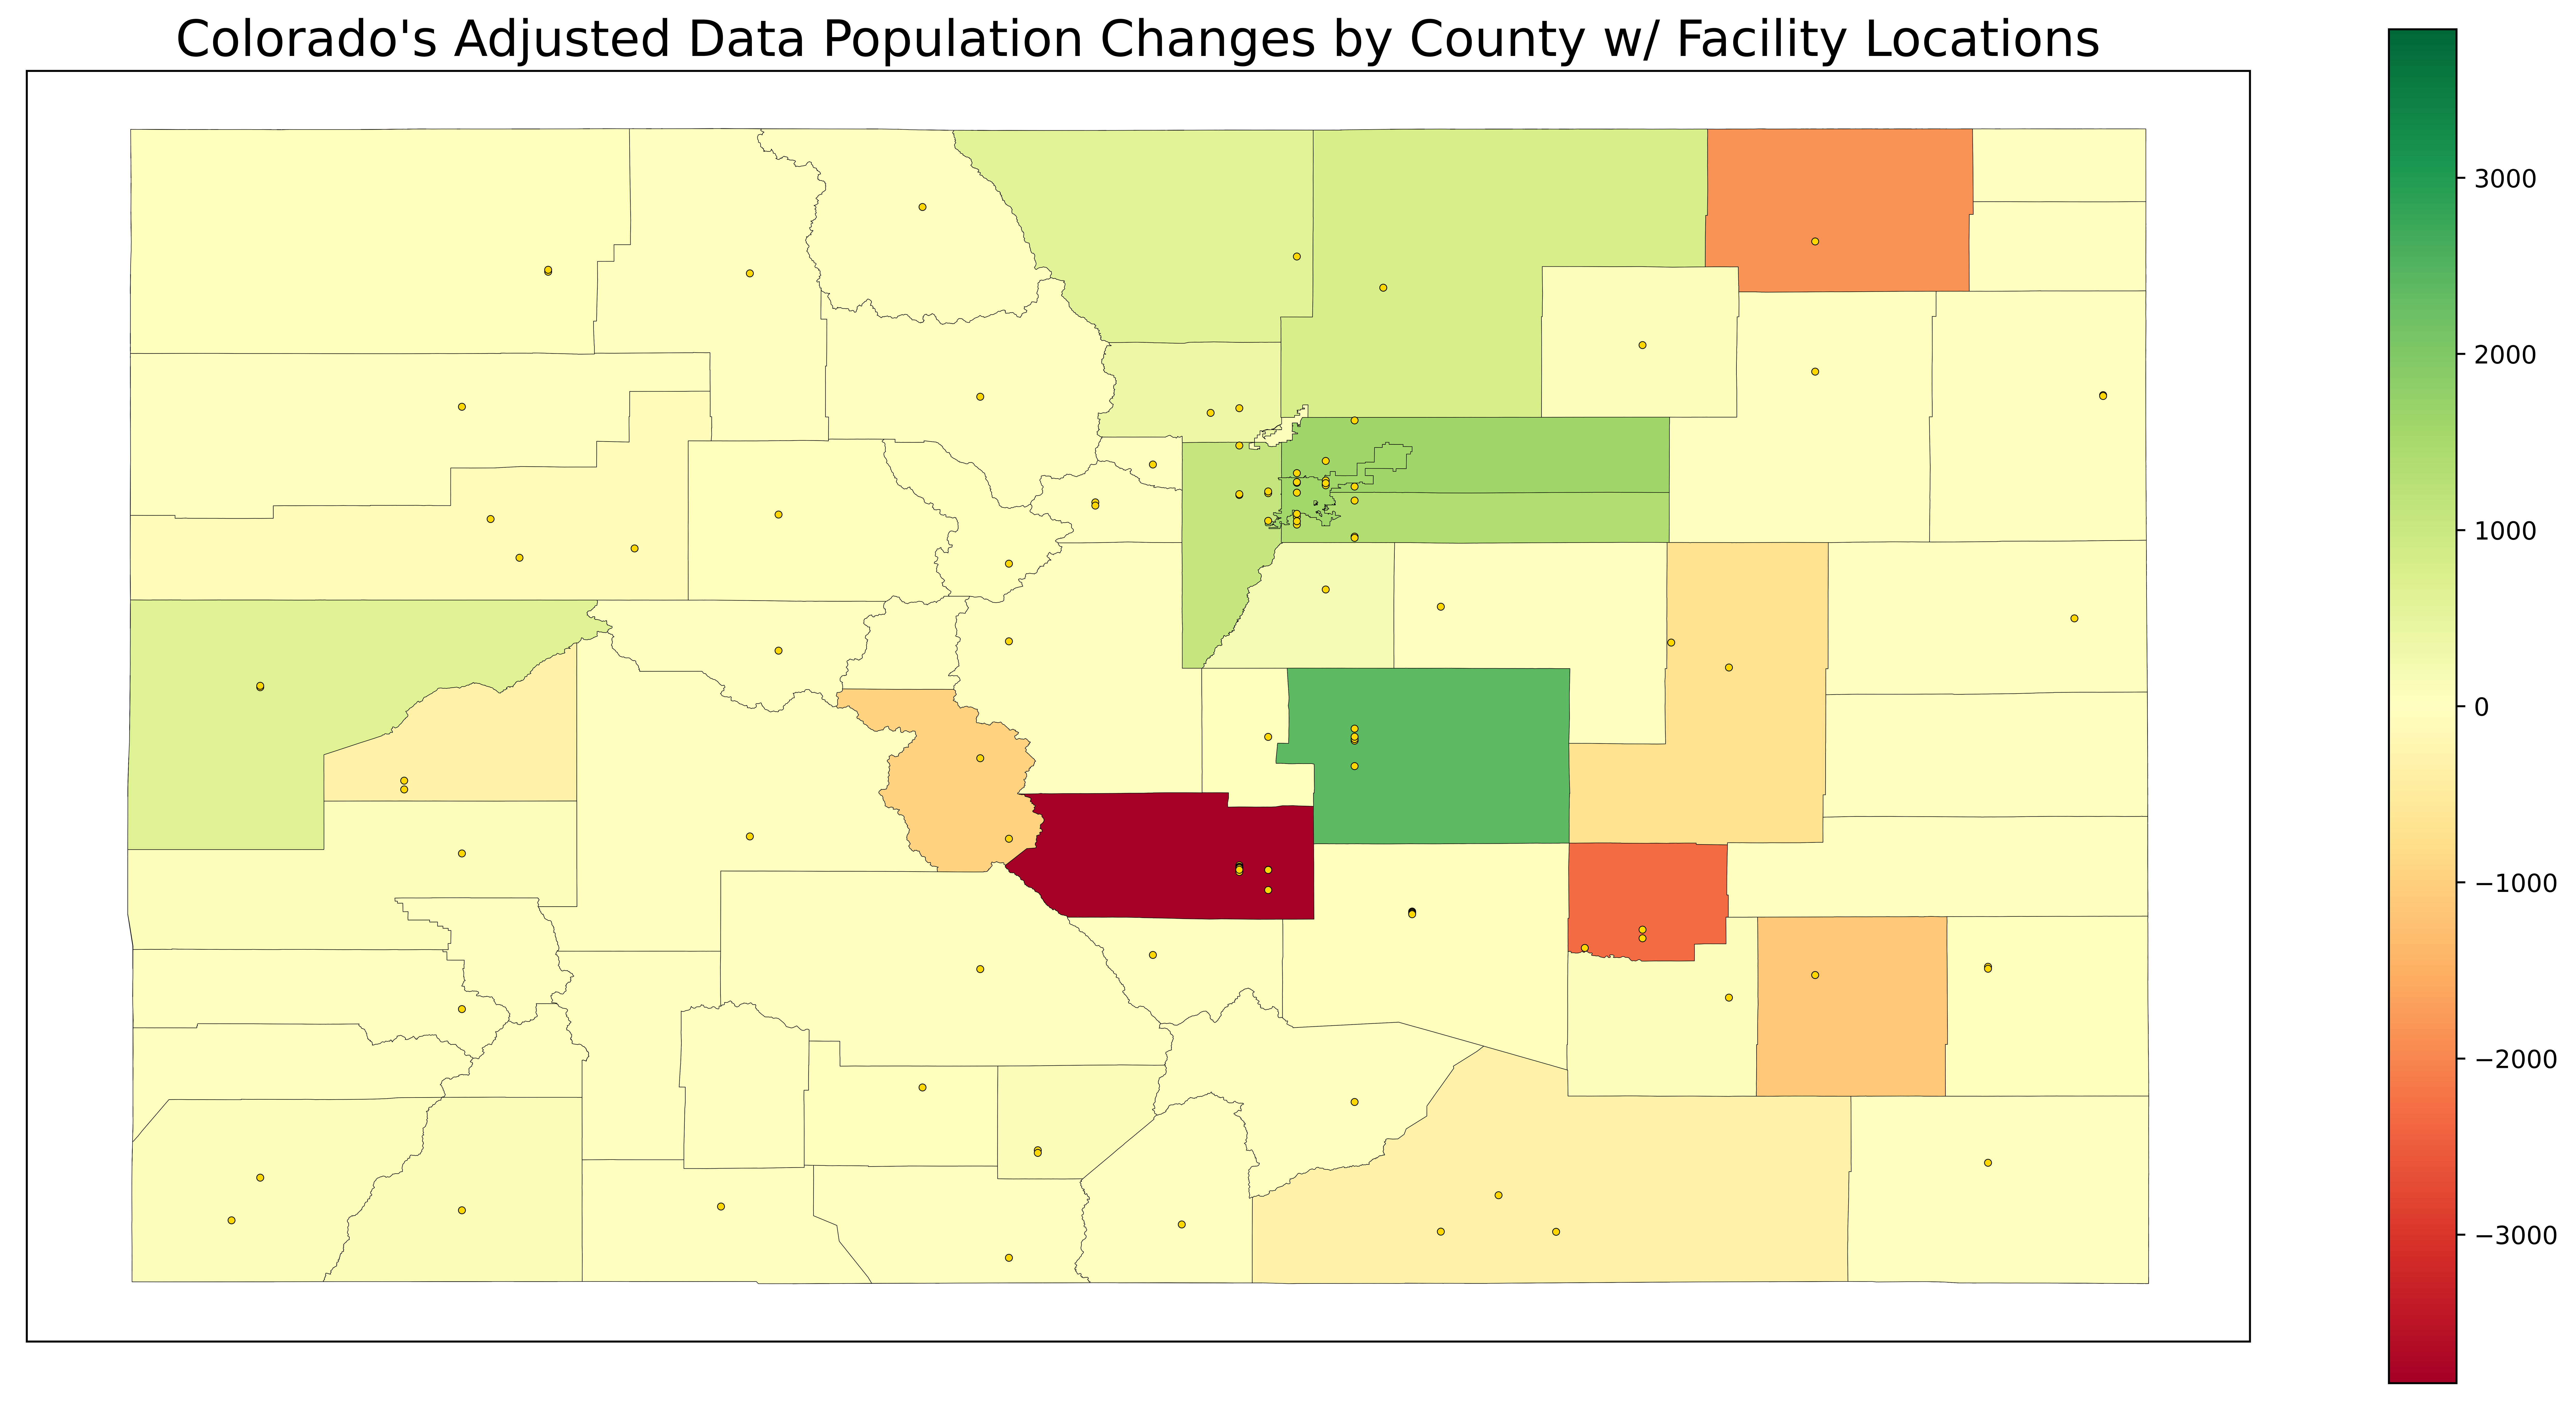 Colorado's Adjusted Data Population Changes by County with Facility Locations